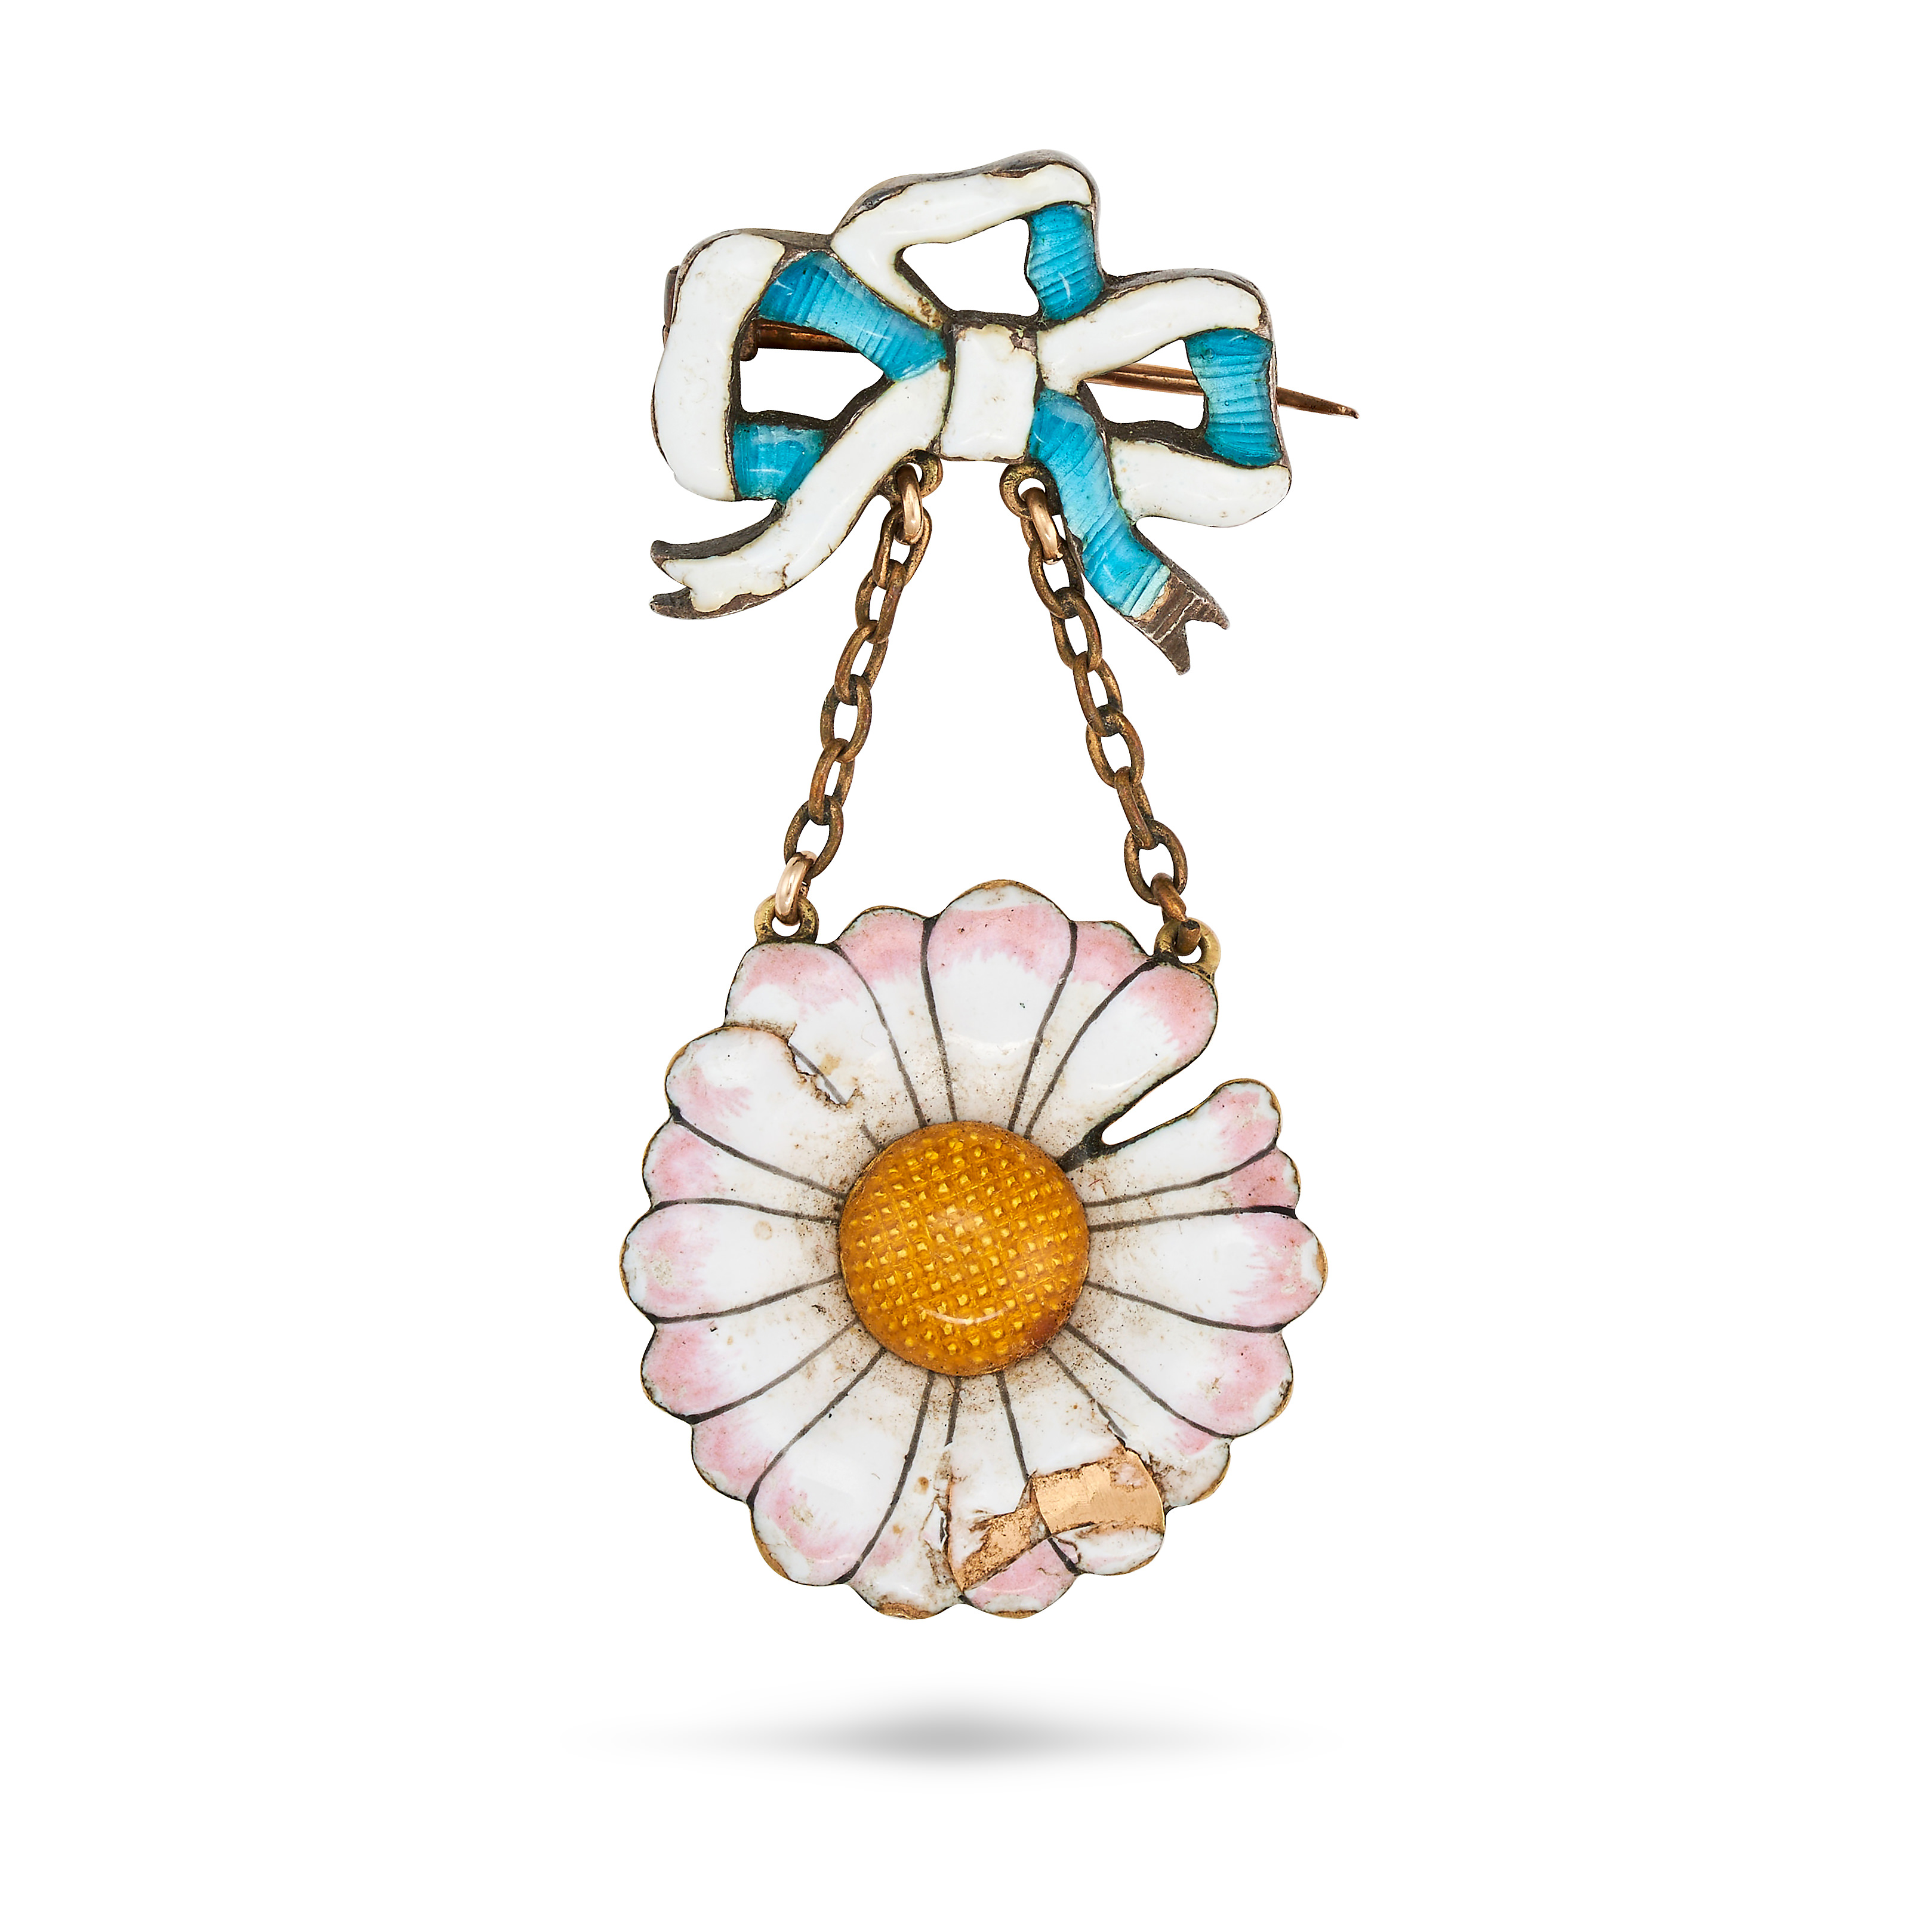 CHILD & CHILD, AN ANTIQUE ENAMEL DAISY BROOCH designed as a bow decorated with turquoise and whit...